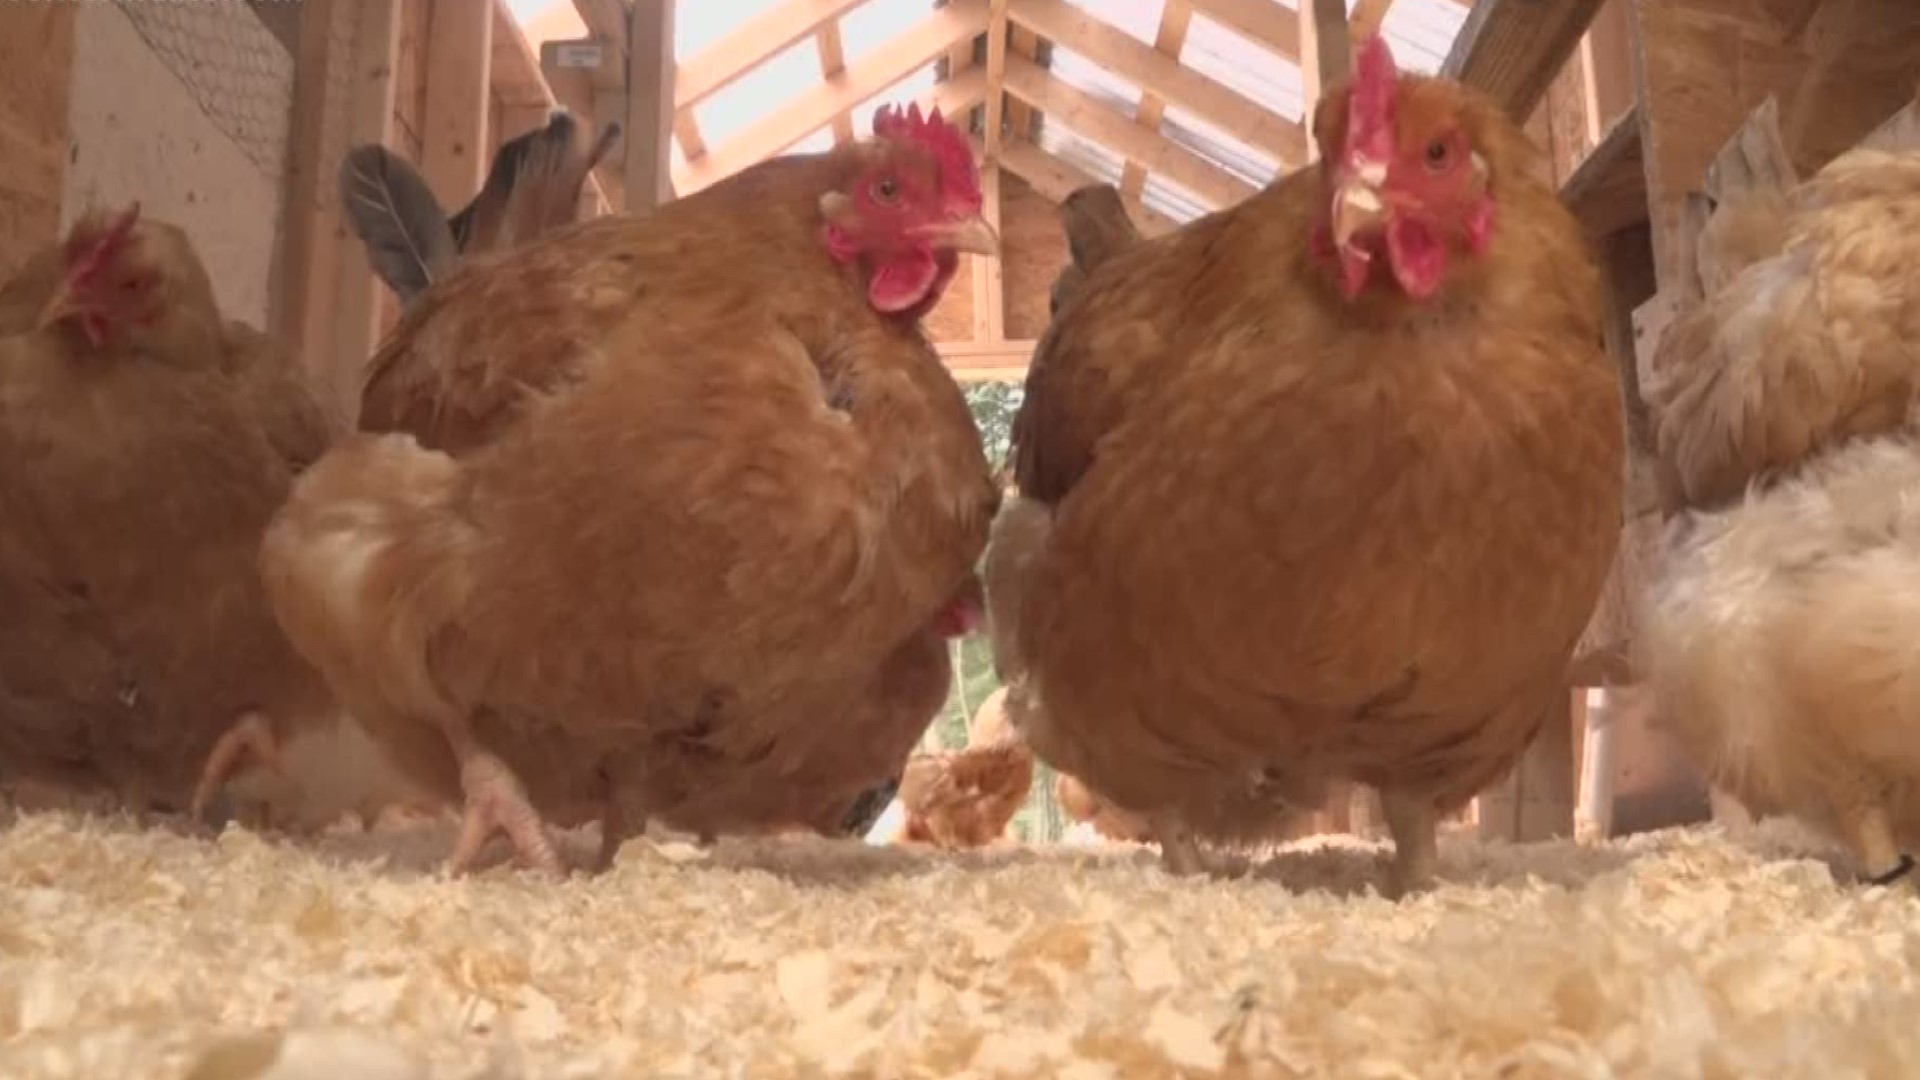 In Kenduskeag, families like the Tyrrell's can keep all of the chickens they want. In Portland, there's an ordinance allowing residents a maximum of 6 chickens and they all have to be female hens. Bangor is considering becoming the next city like Portland to allow a number of domestic chickens in residents' backyards.